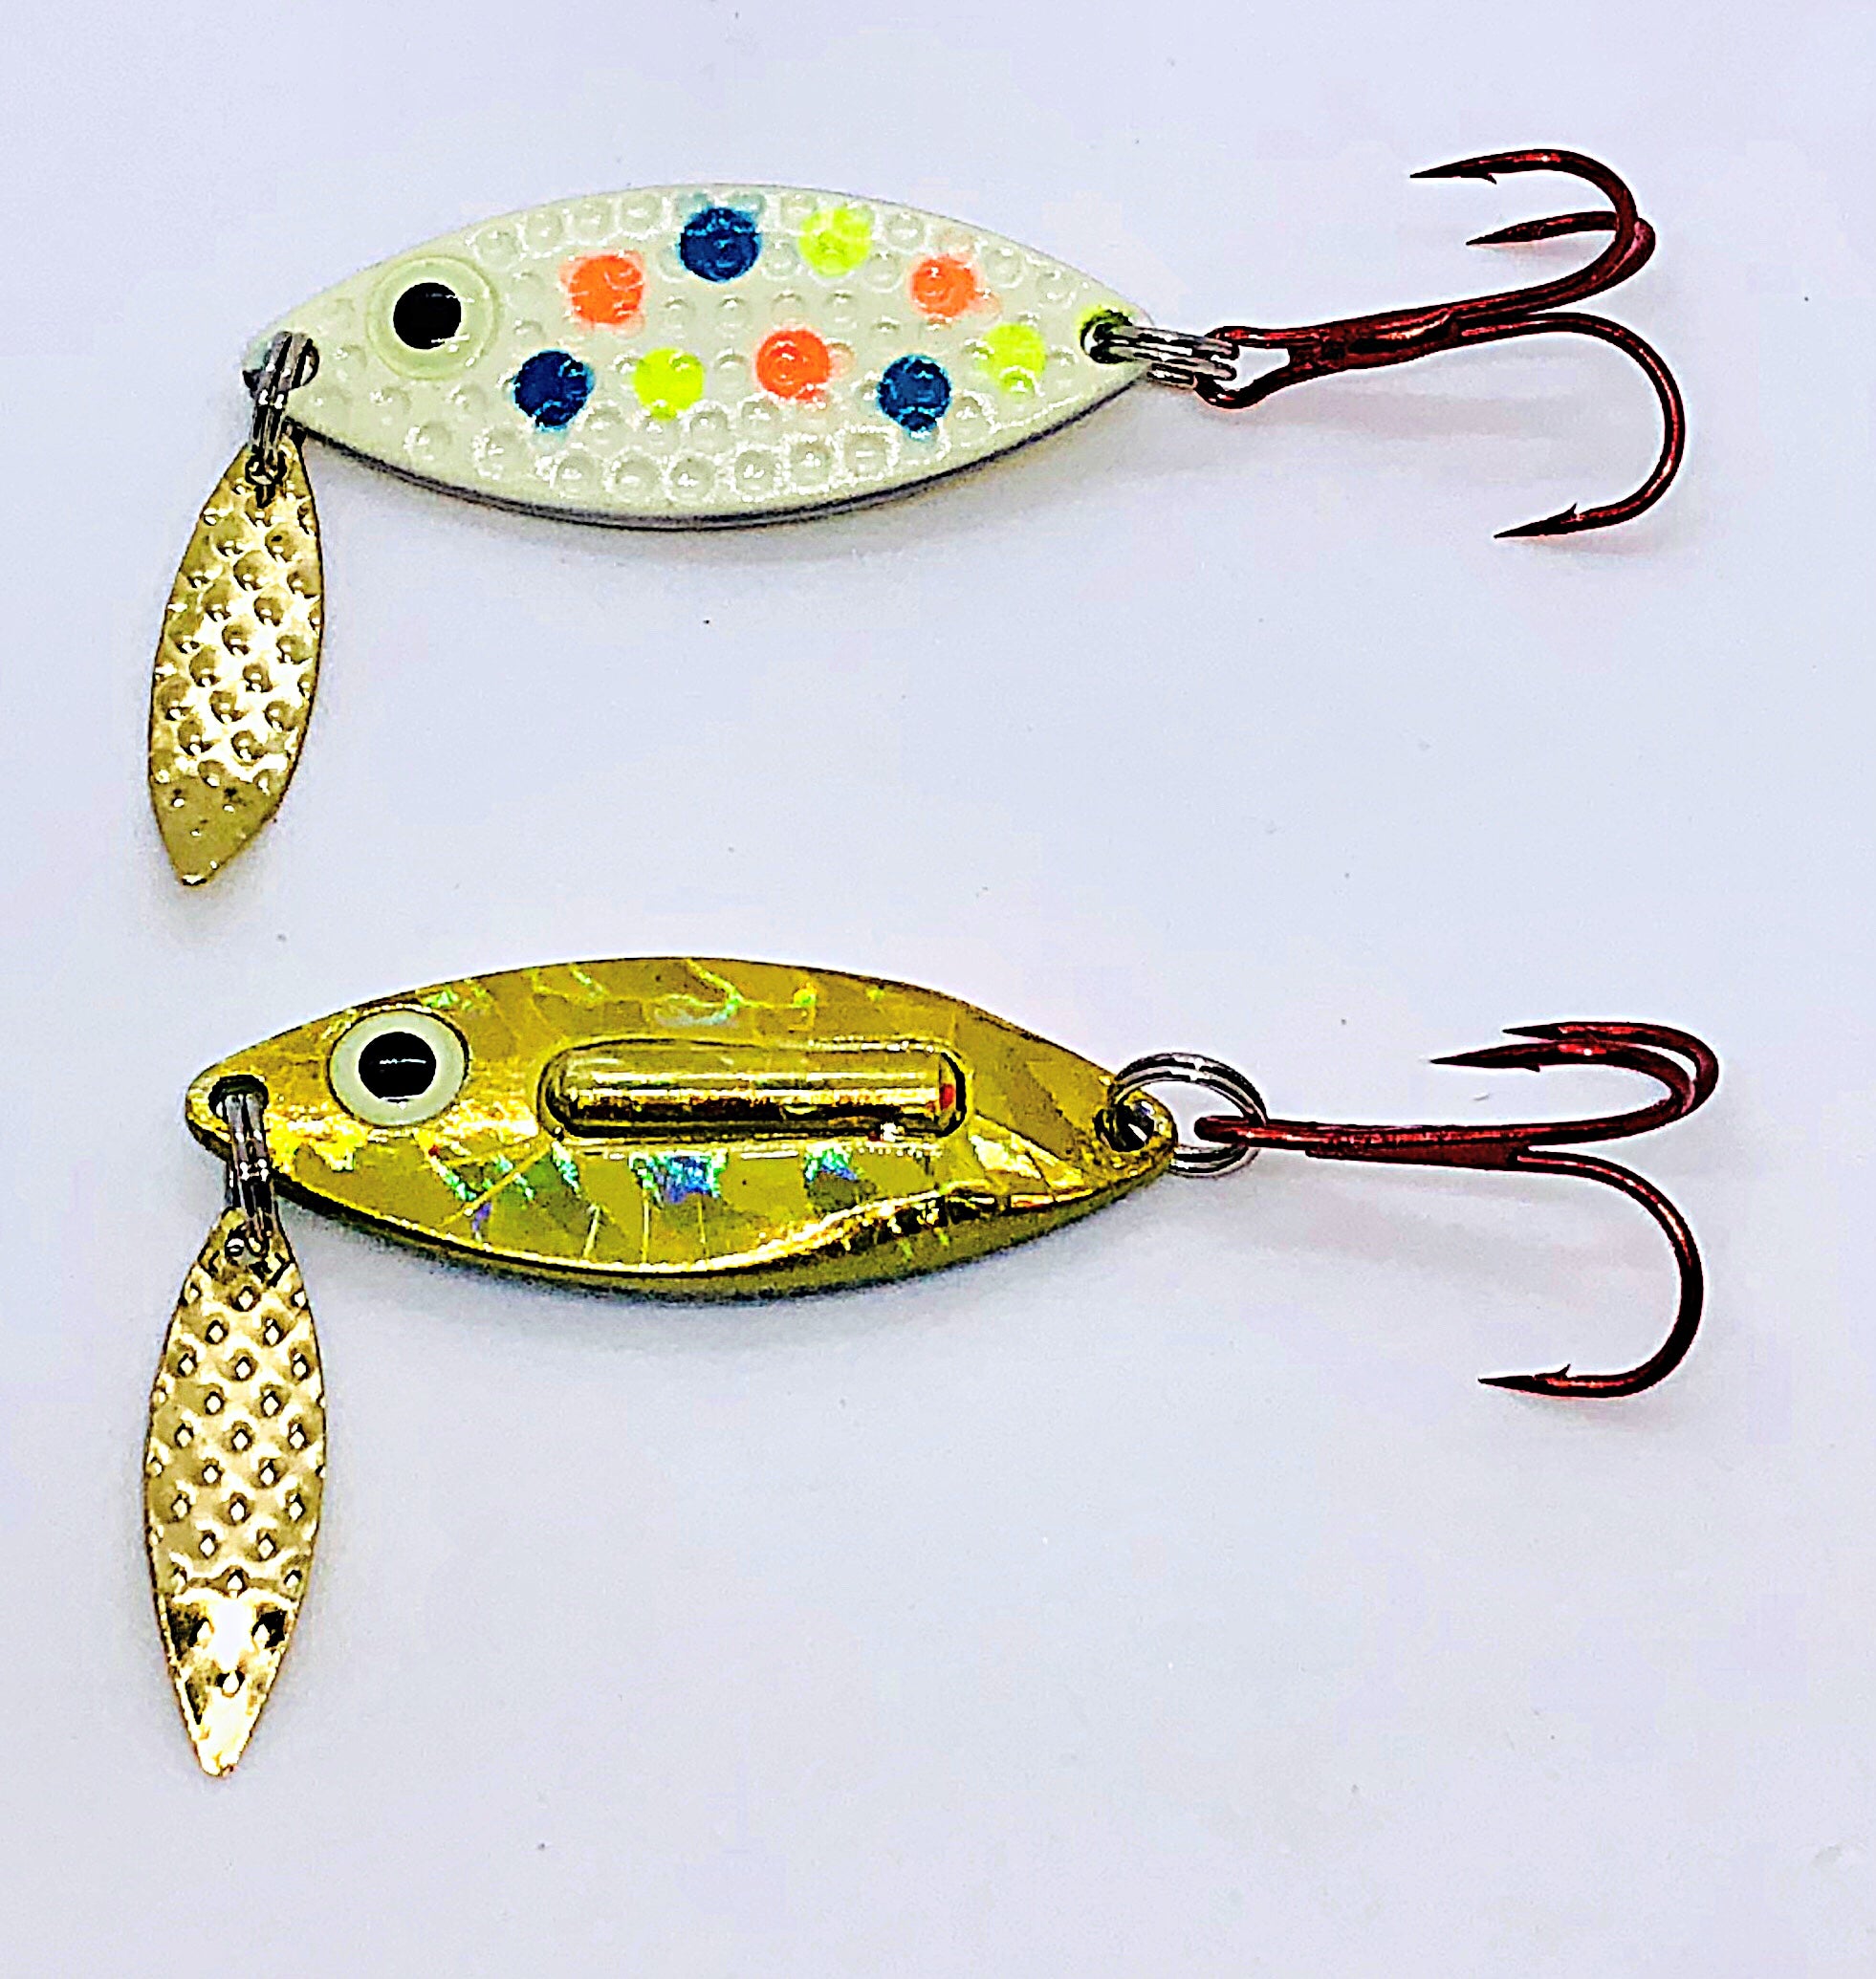 Pk Lures Rattle Spoon